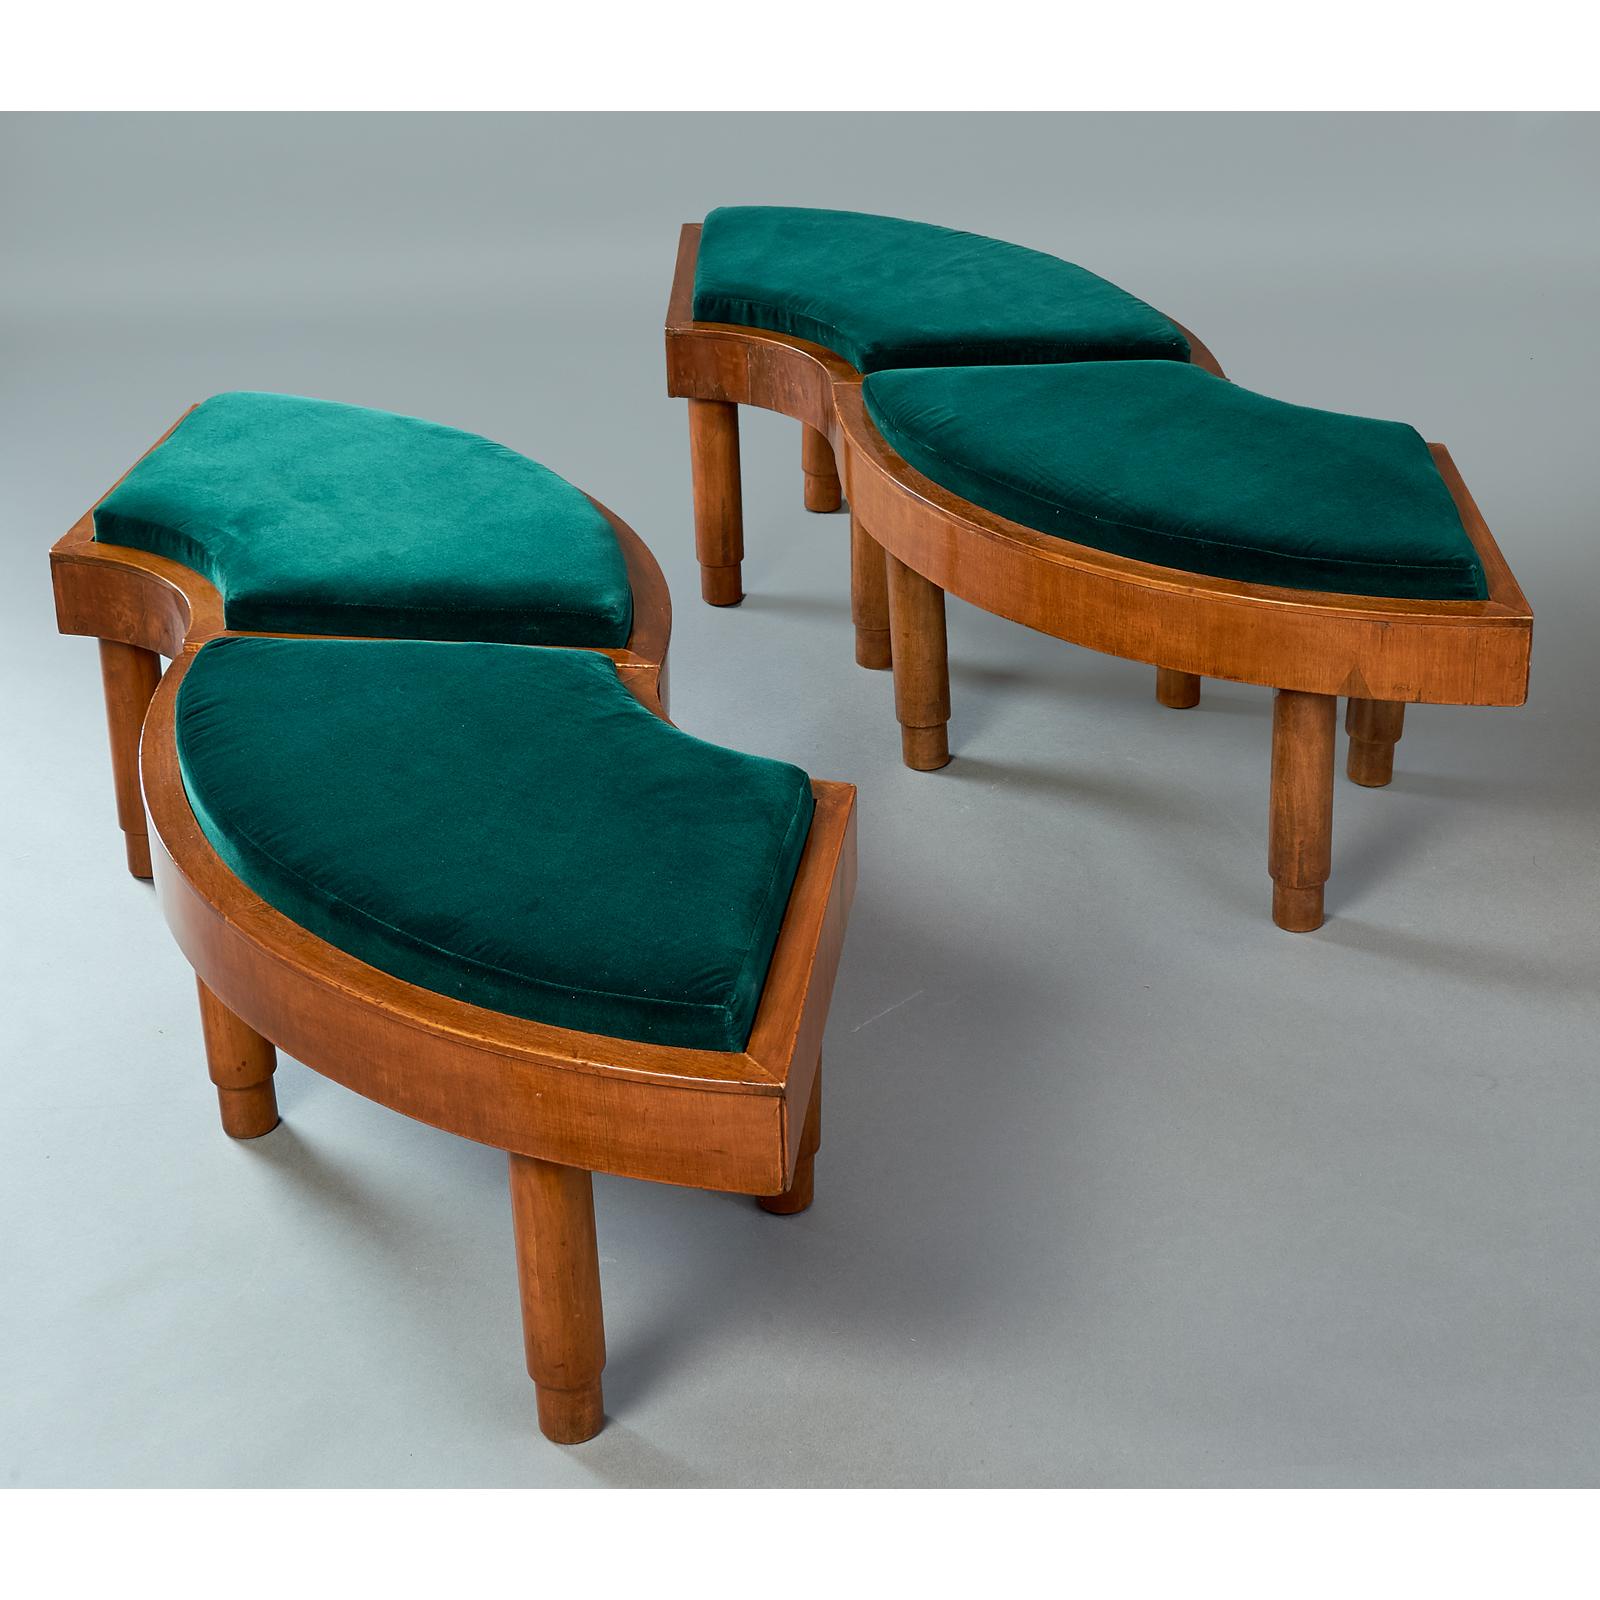 Wreath of Four Polished Wood Stools, Italy 1930s 1